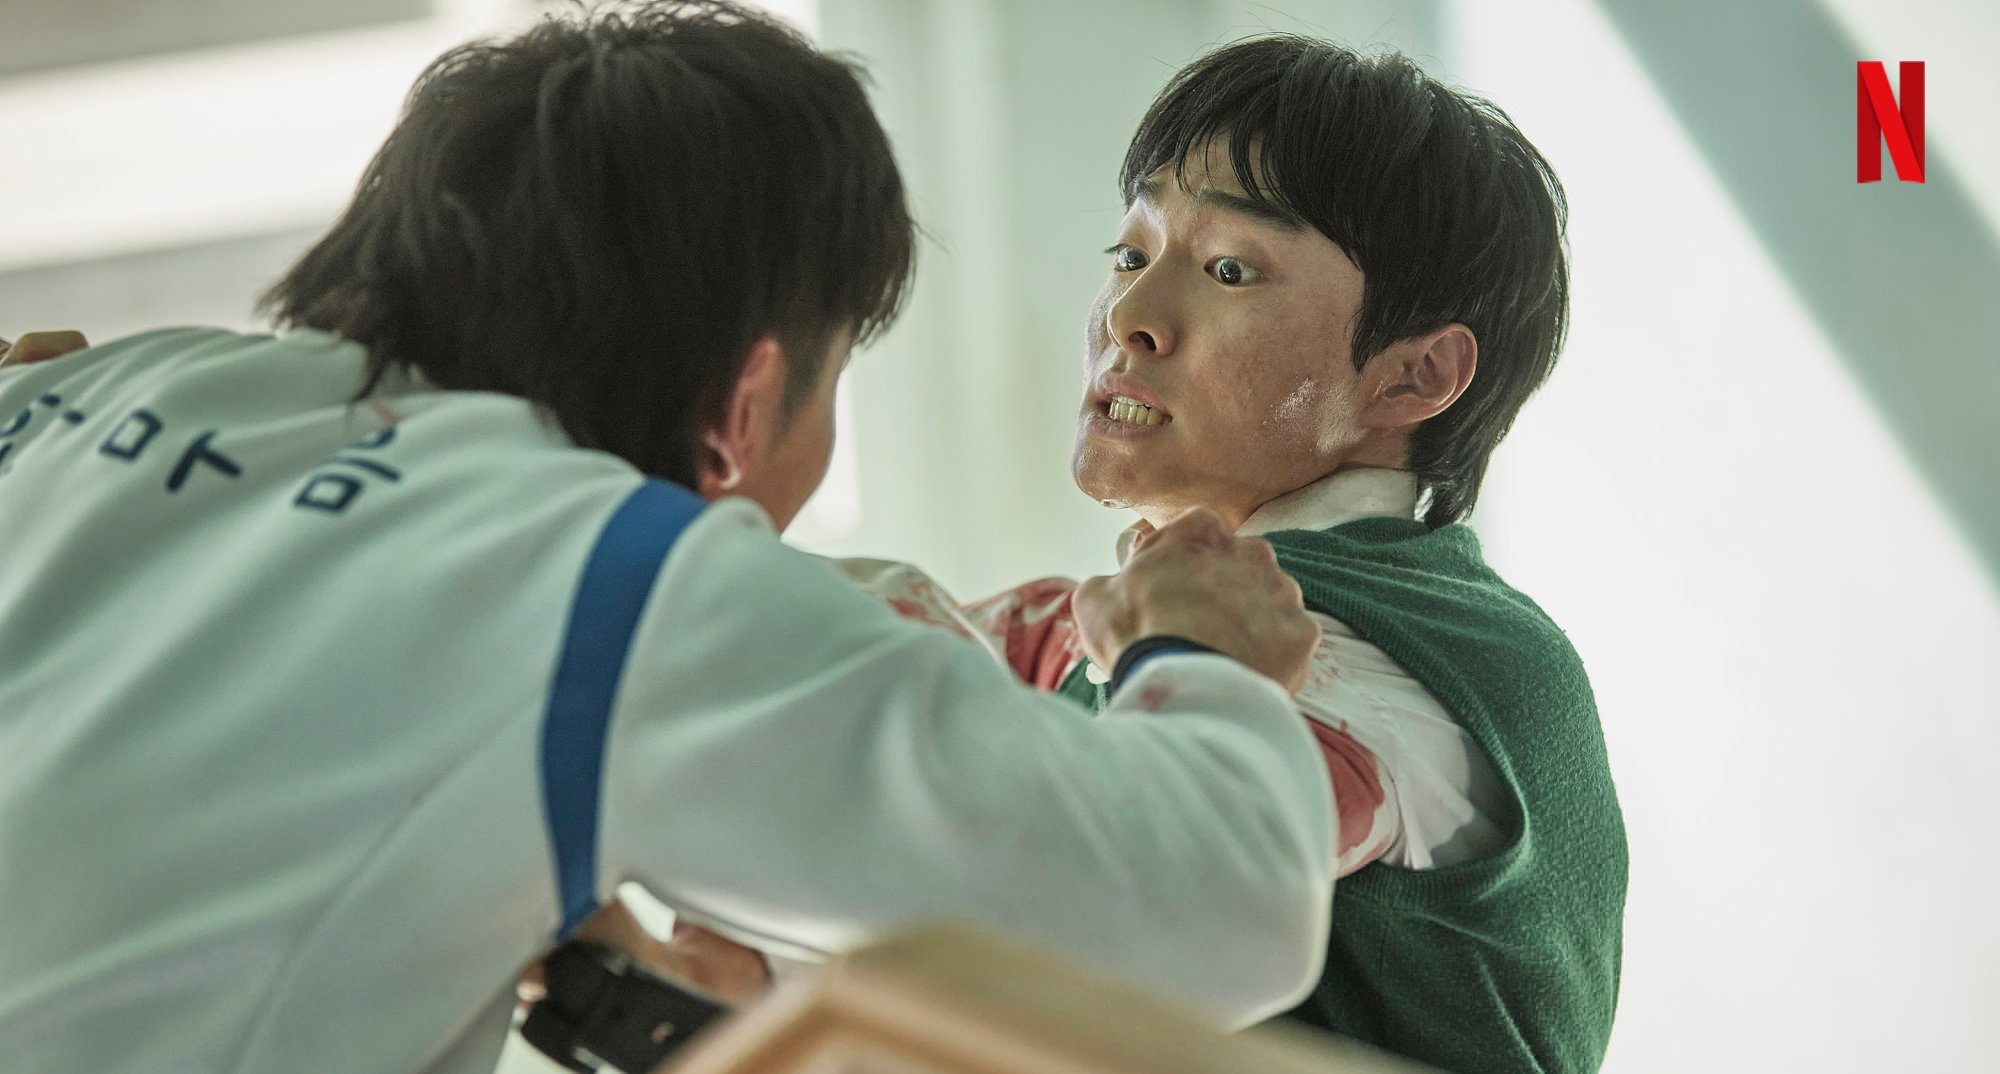 Yoon Chan-young as Cheon-sang in 'All of Us Are Dead' being attacked by Gwi-nam.